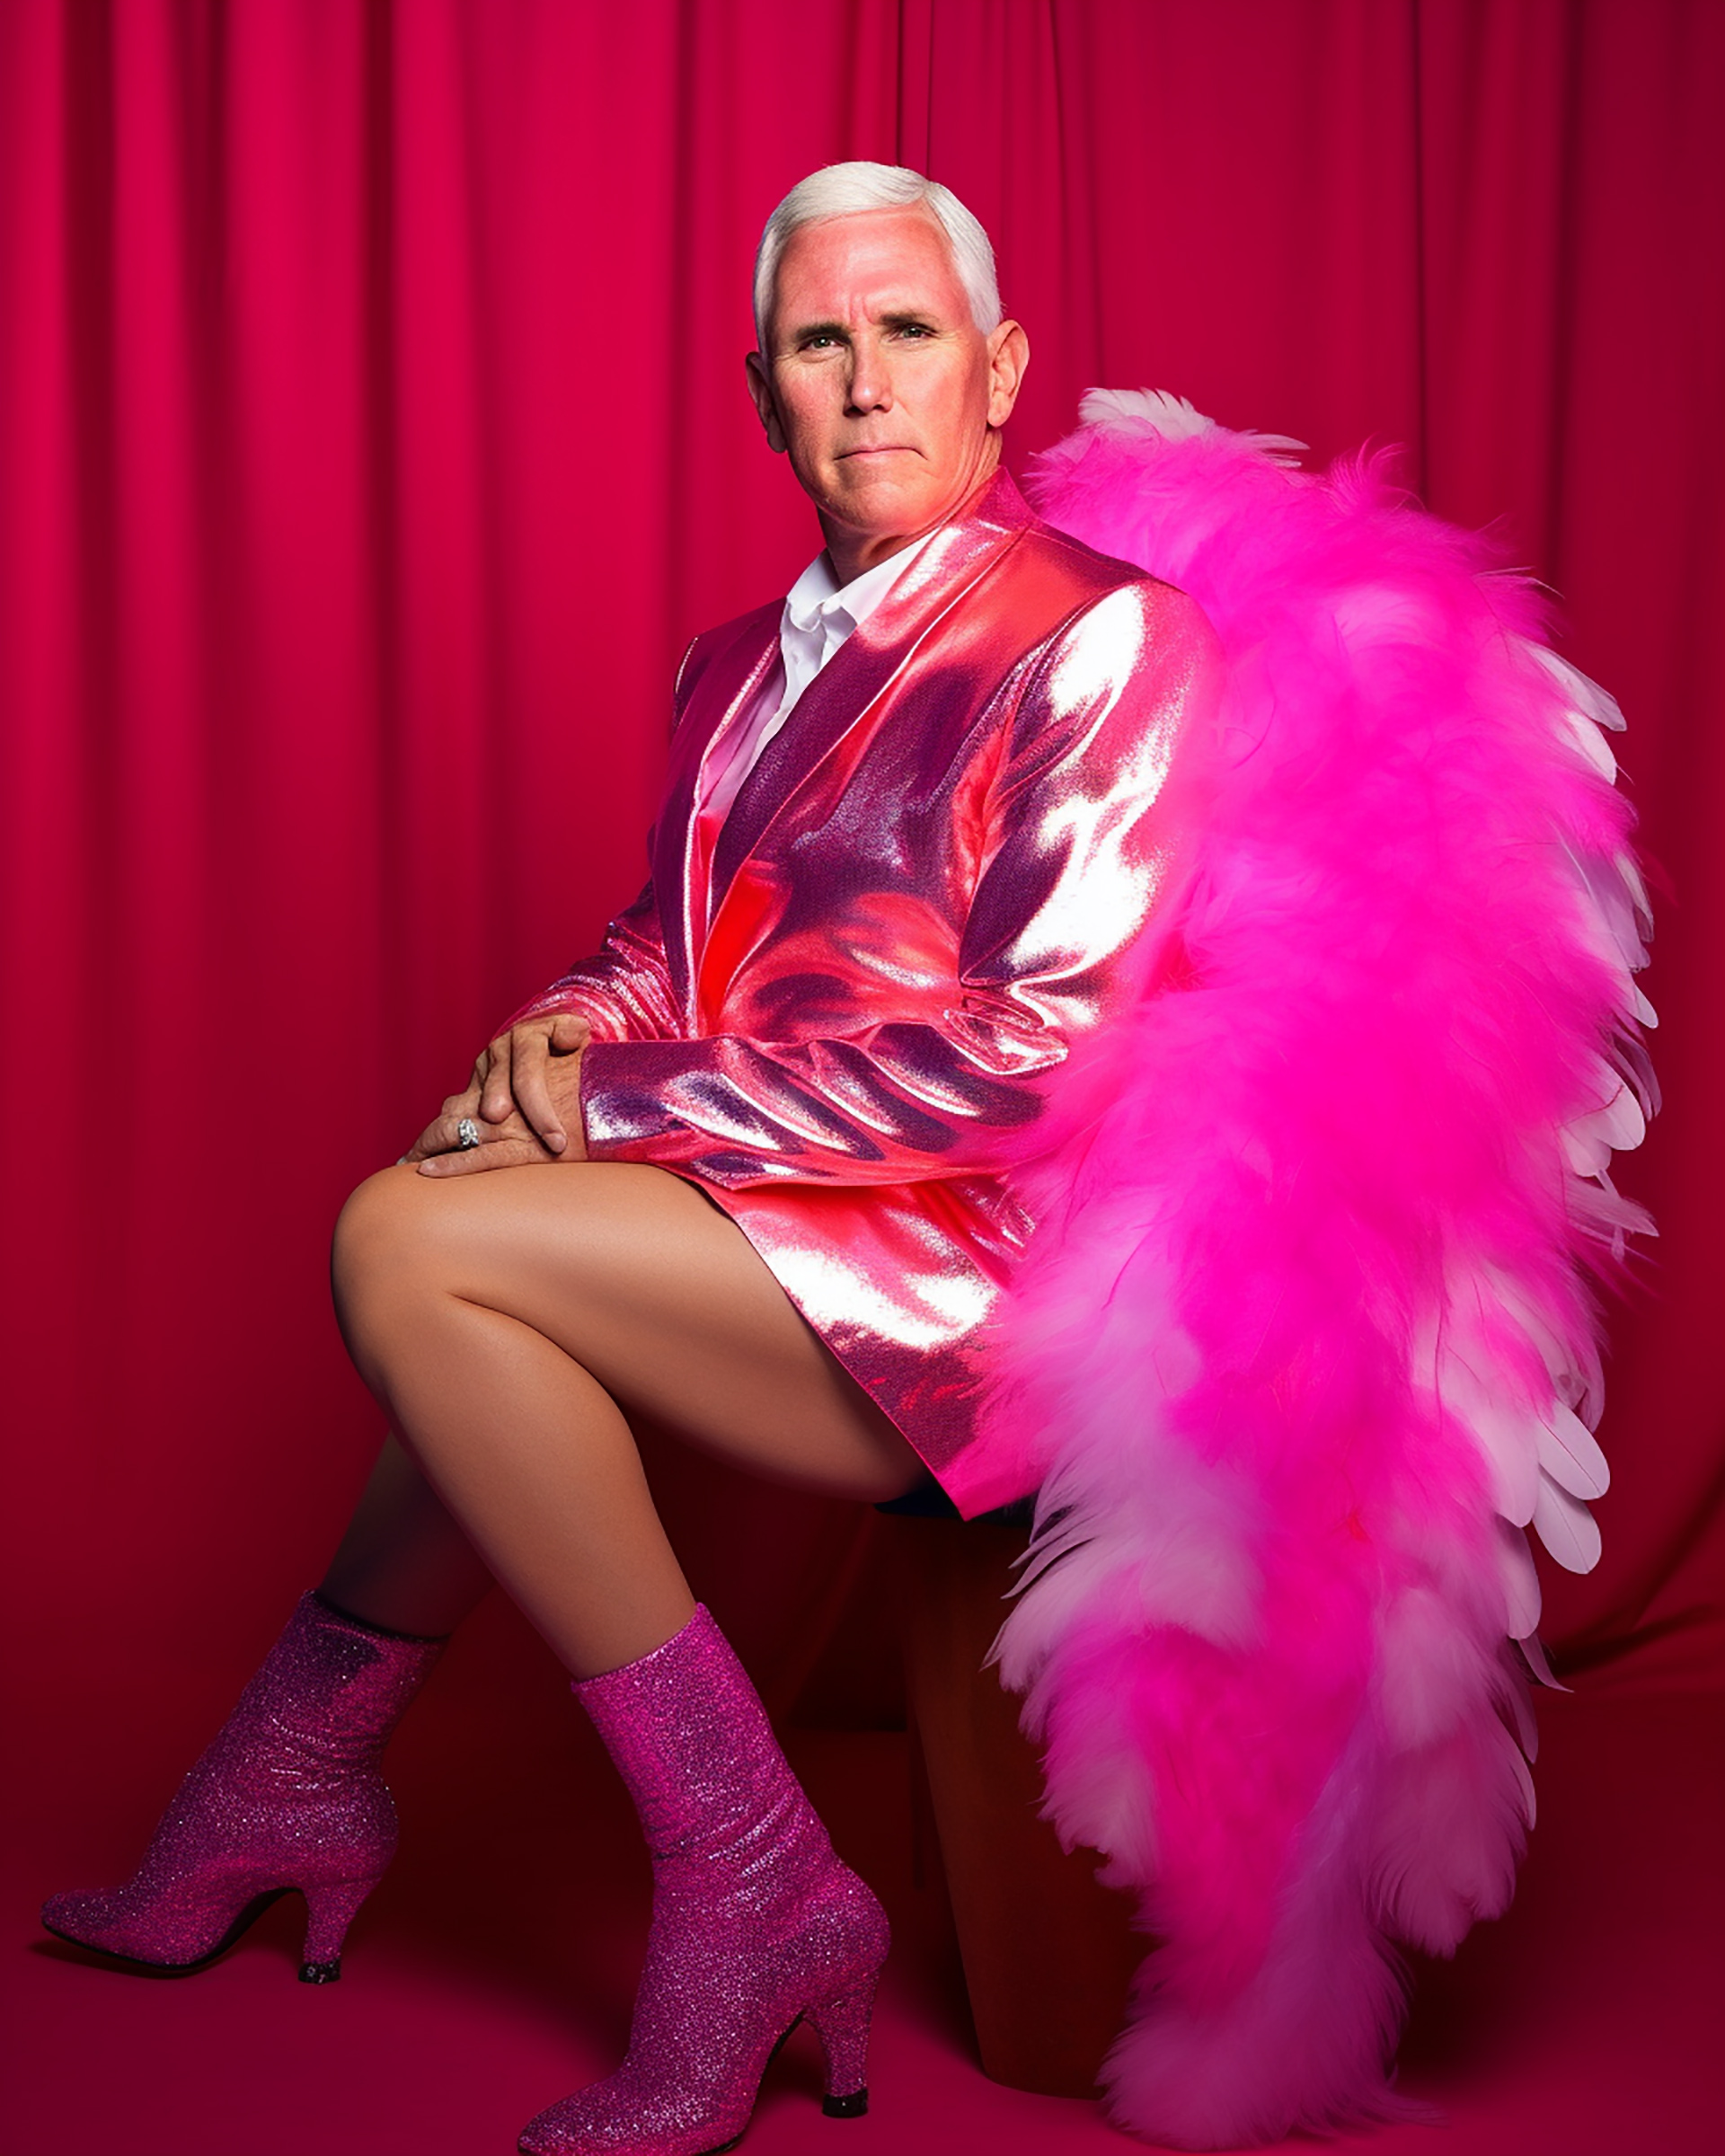 An AI-generated image of former vice president Mike Pence dressed in drag.